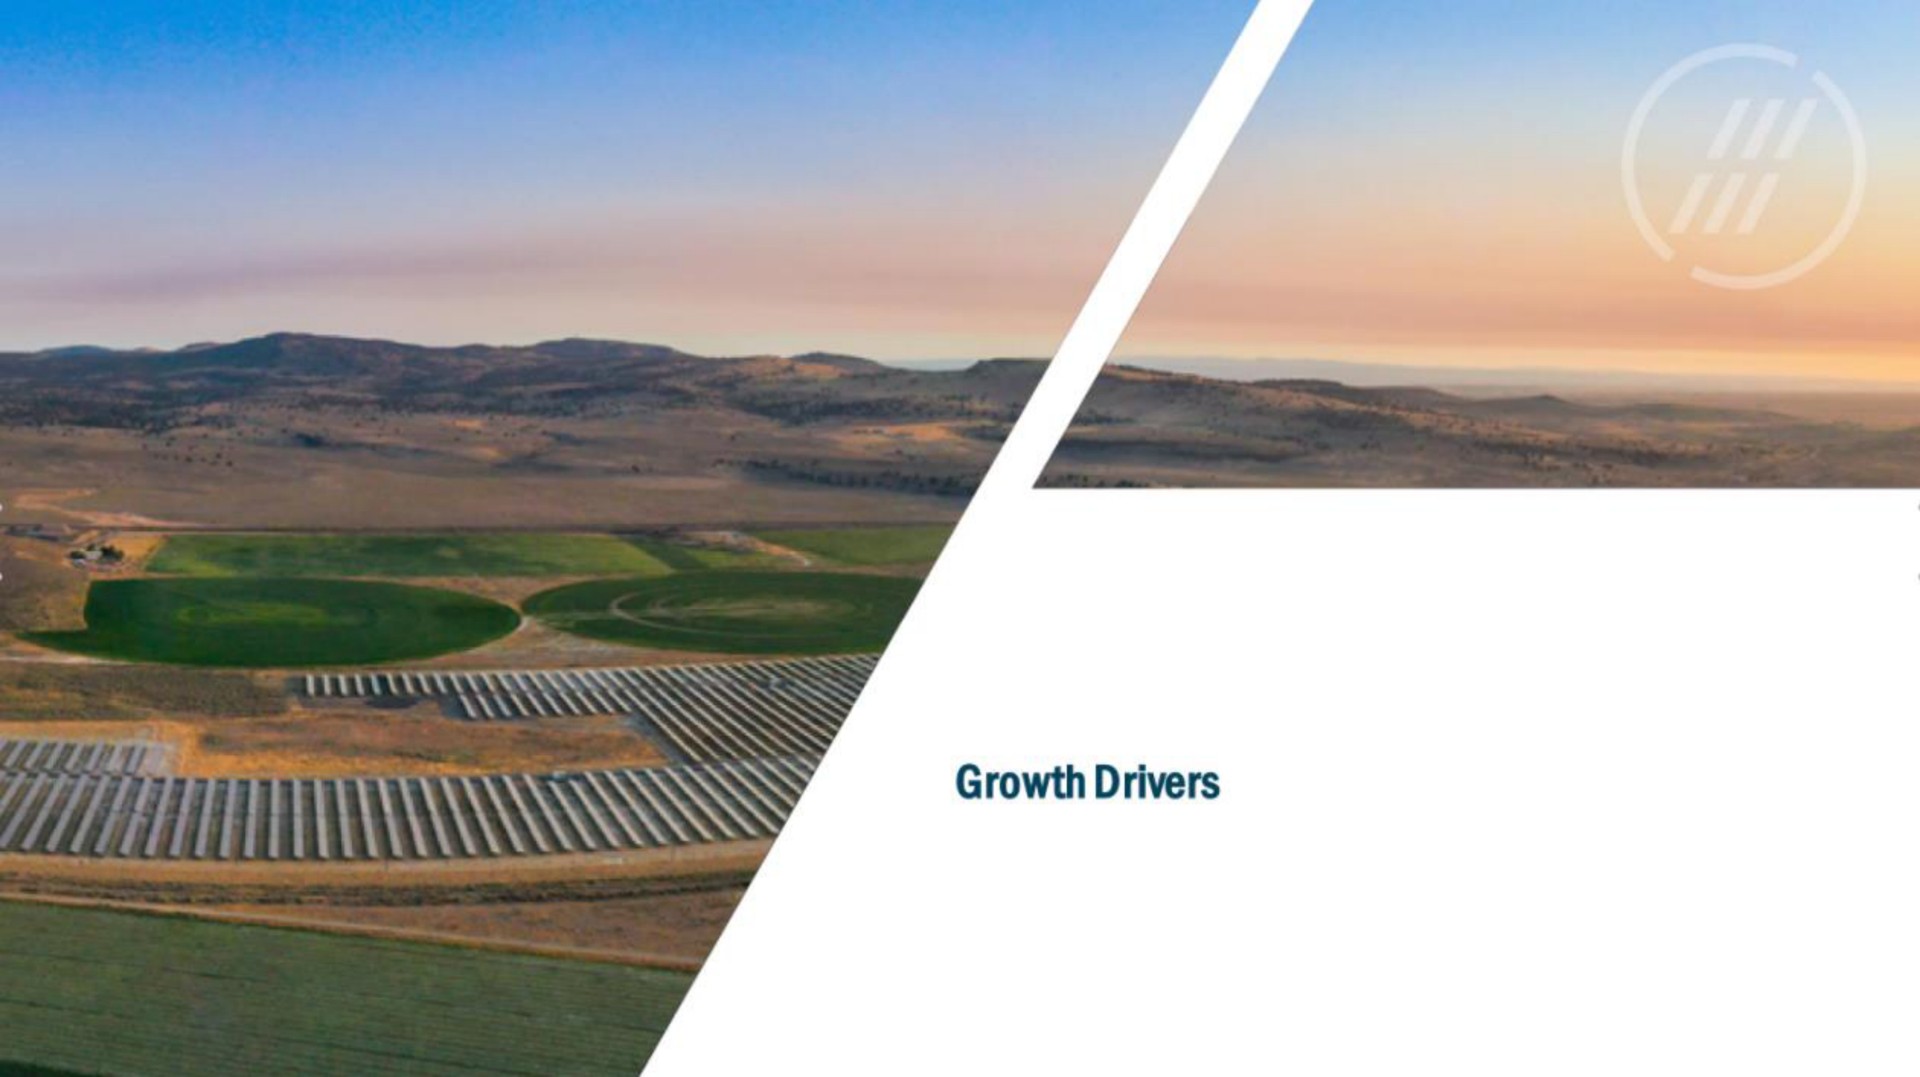 growth drivers | FTC Solar